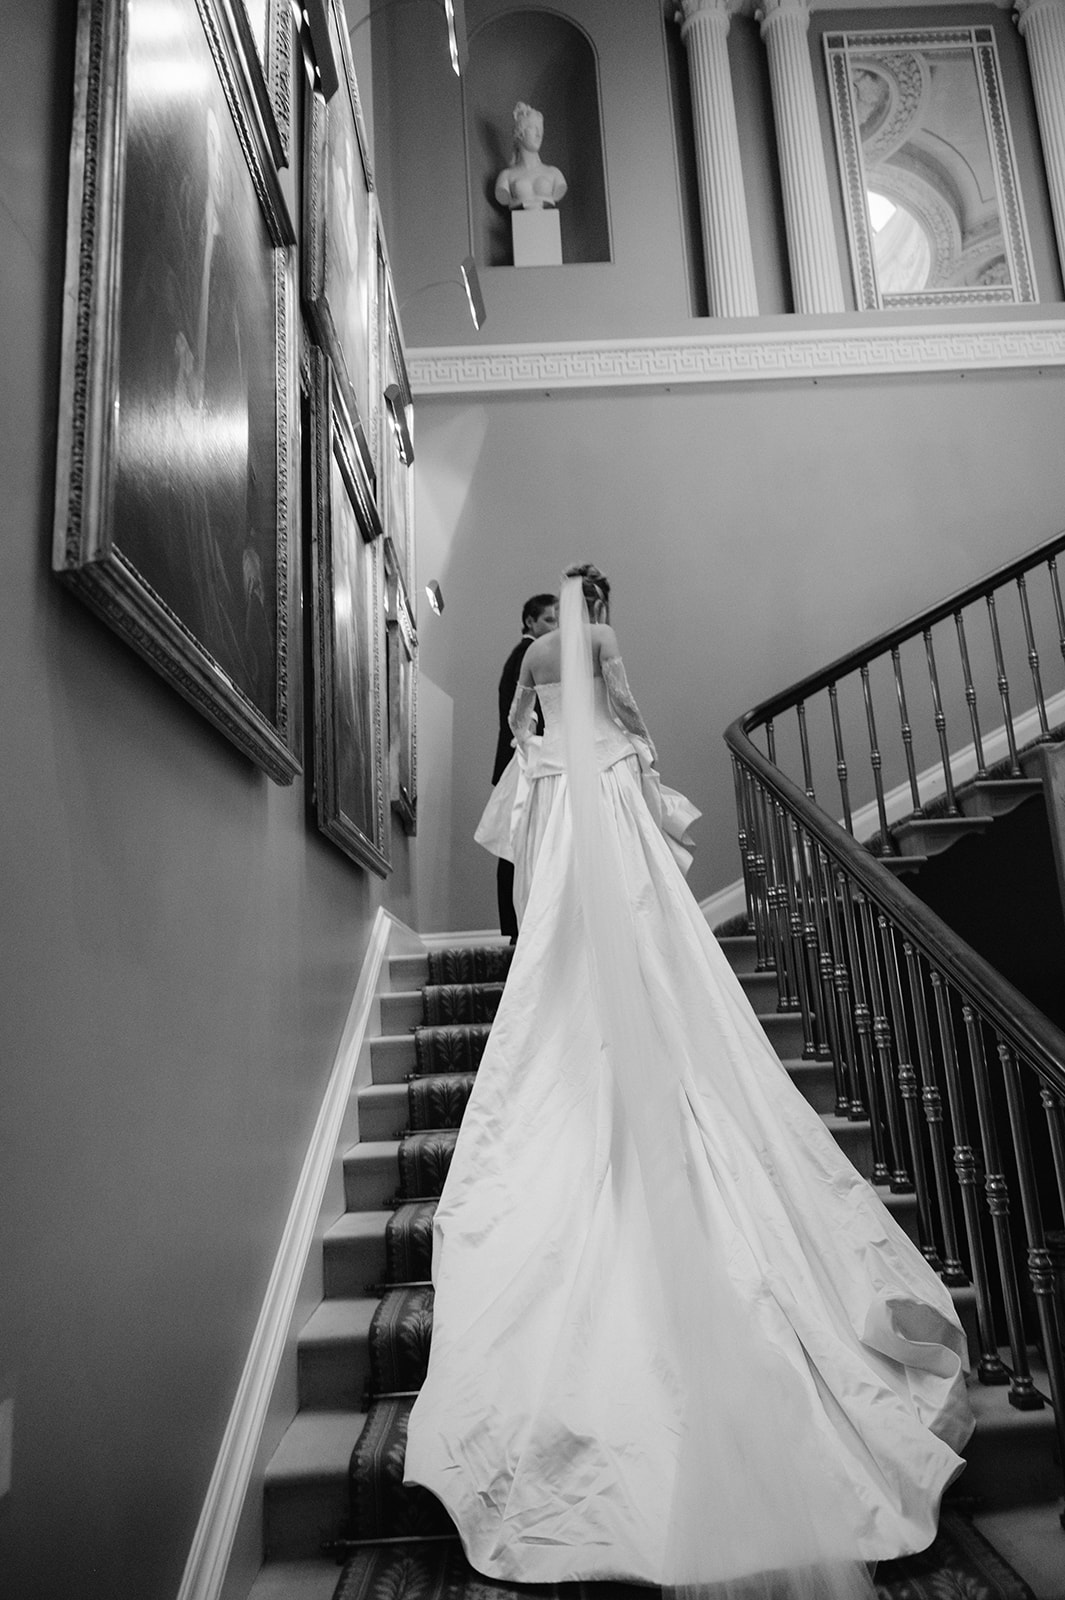 Bride and groom walking up the staircase at Ballyfin Demesne.